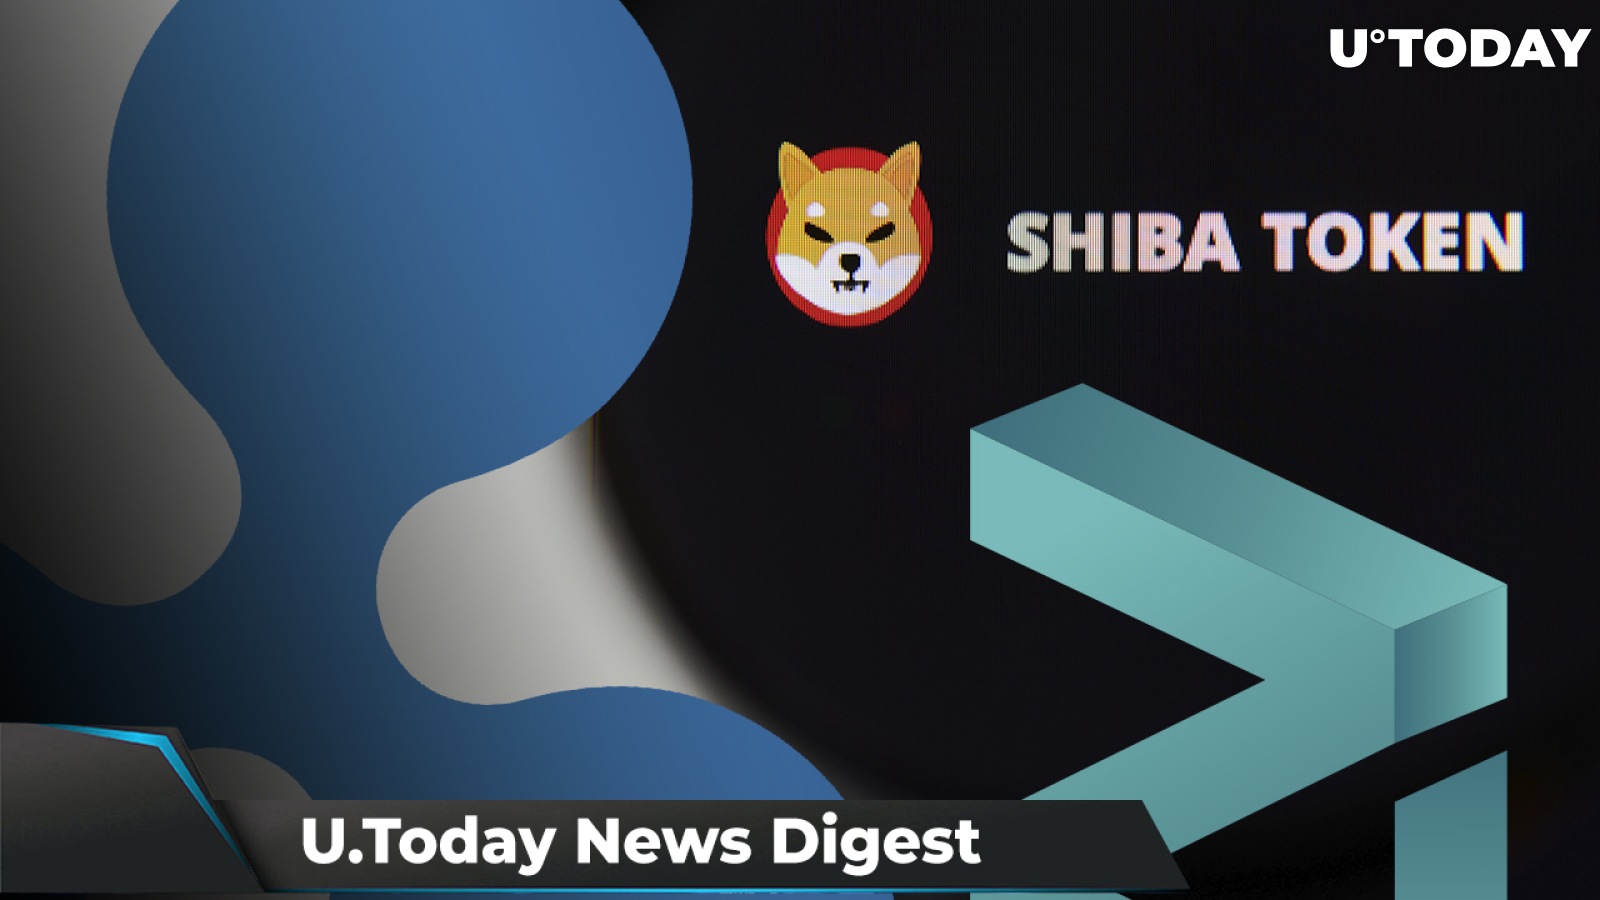 SHIB’s Metaverse Project Is Here, Ripple Reports RippleNet’s Success in Asia-Pacific Region, ZIL Spikes Another 60%: Crypto News Digest by U.Today